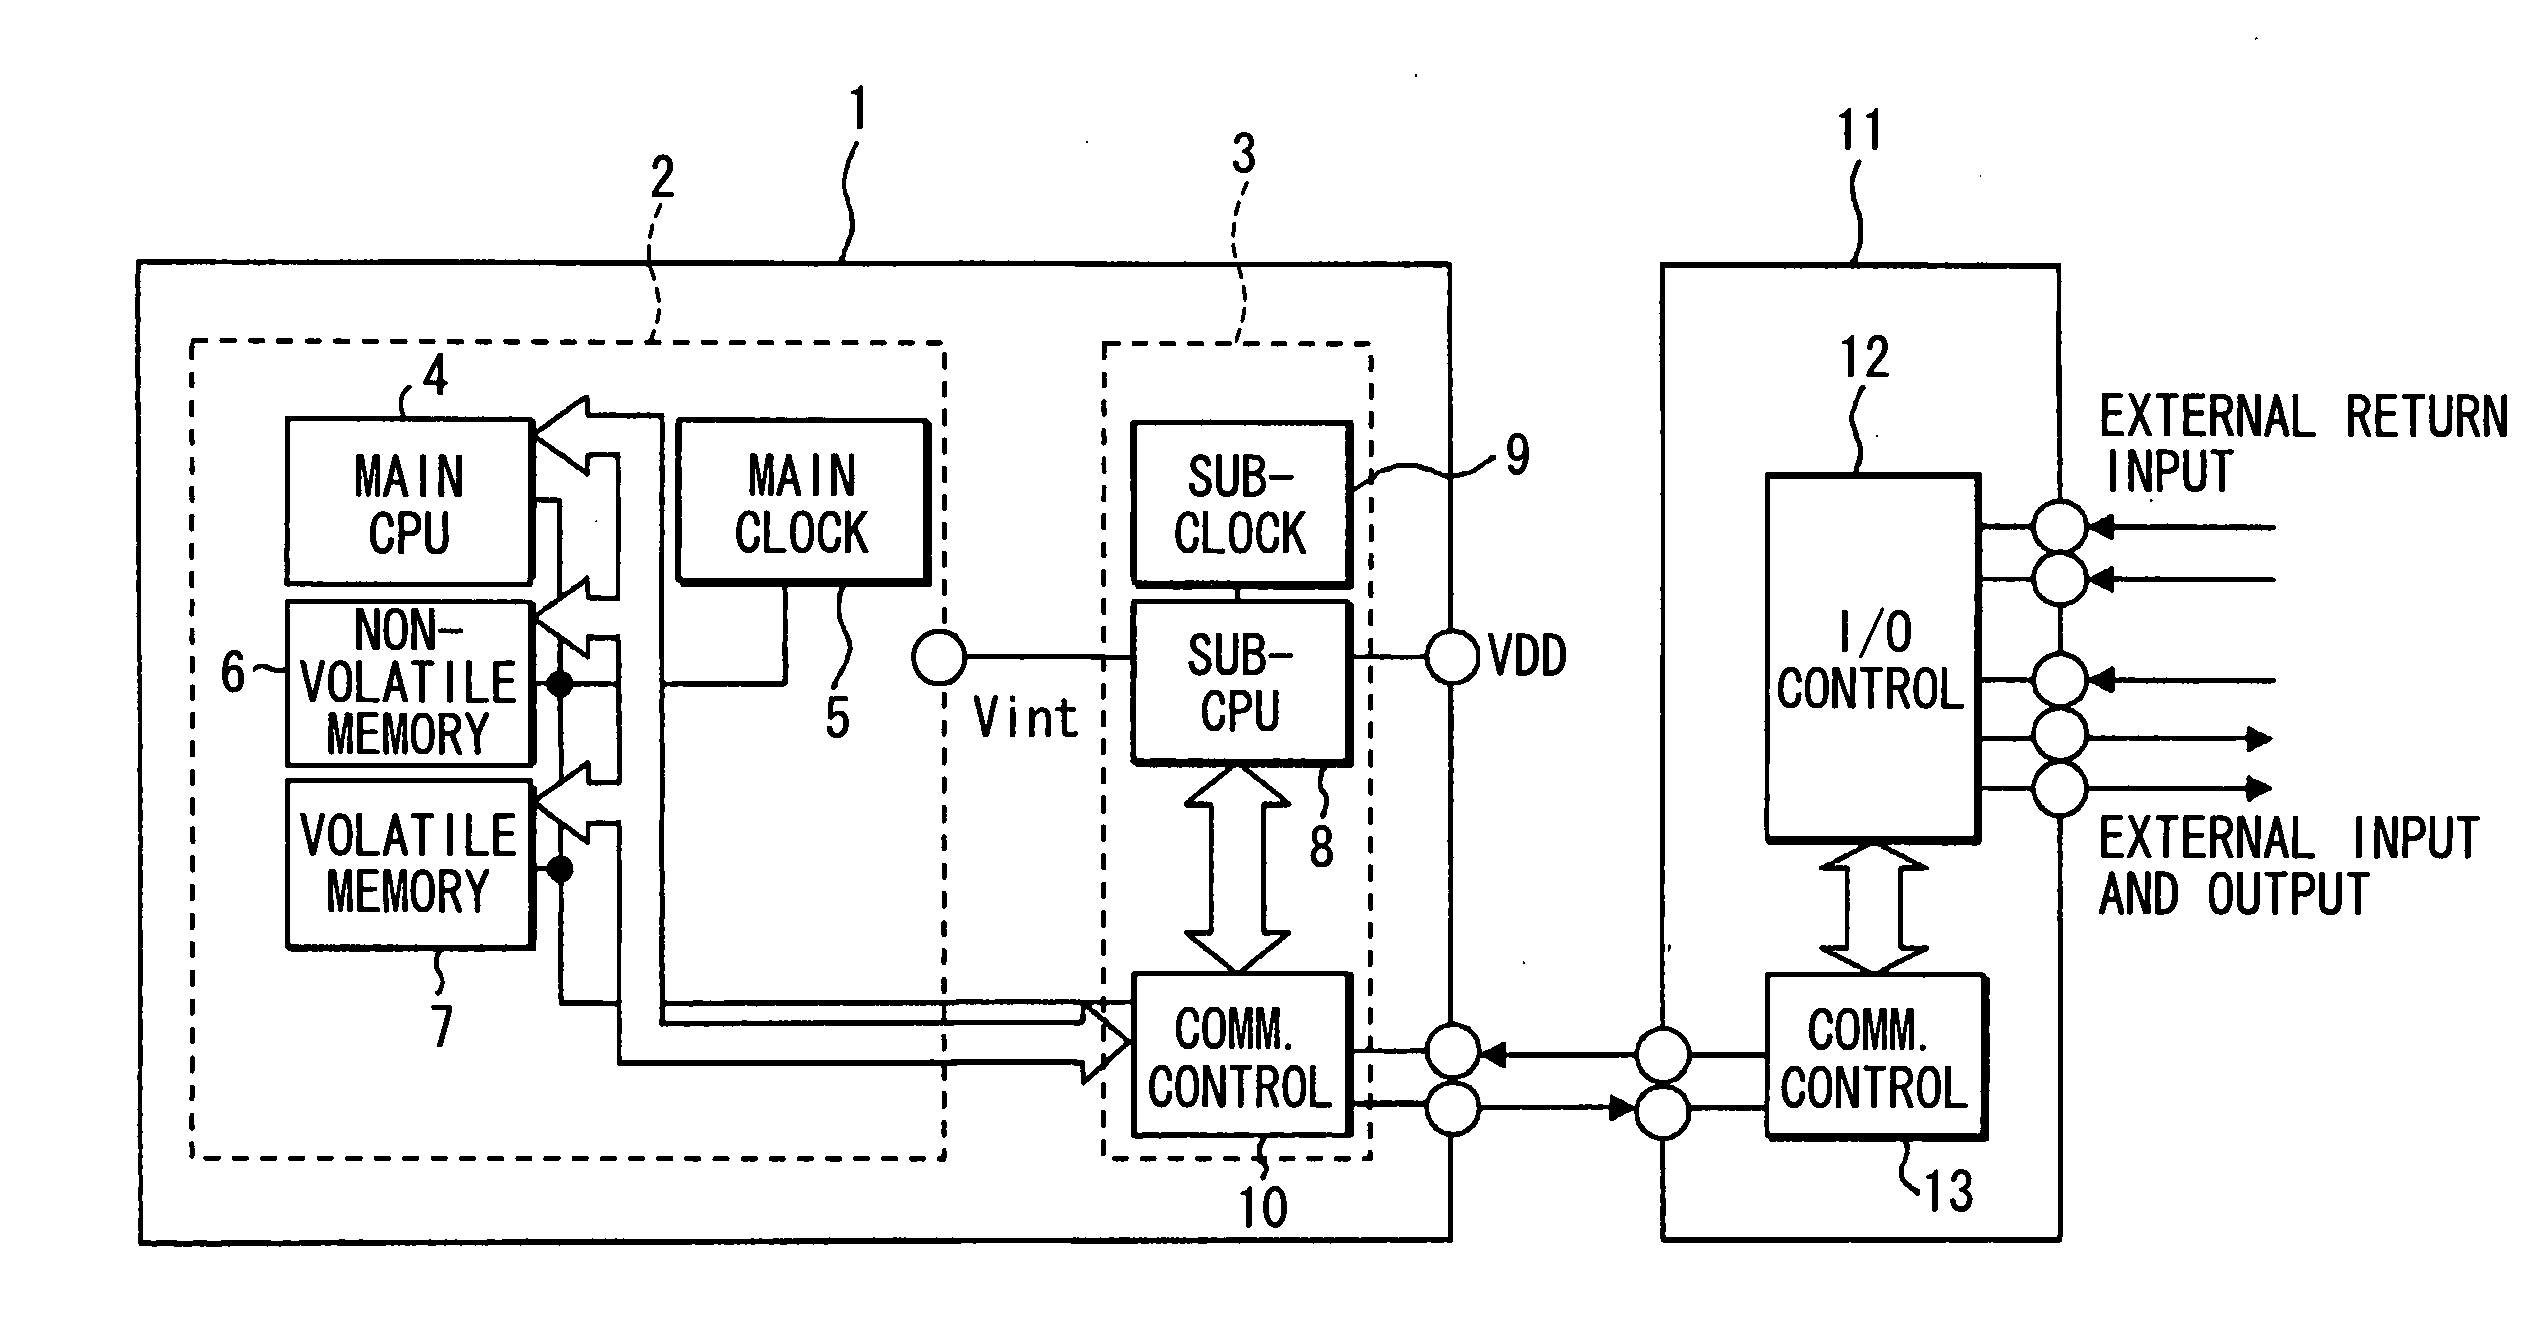 Microcomputer system